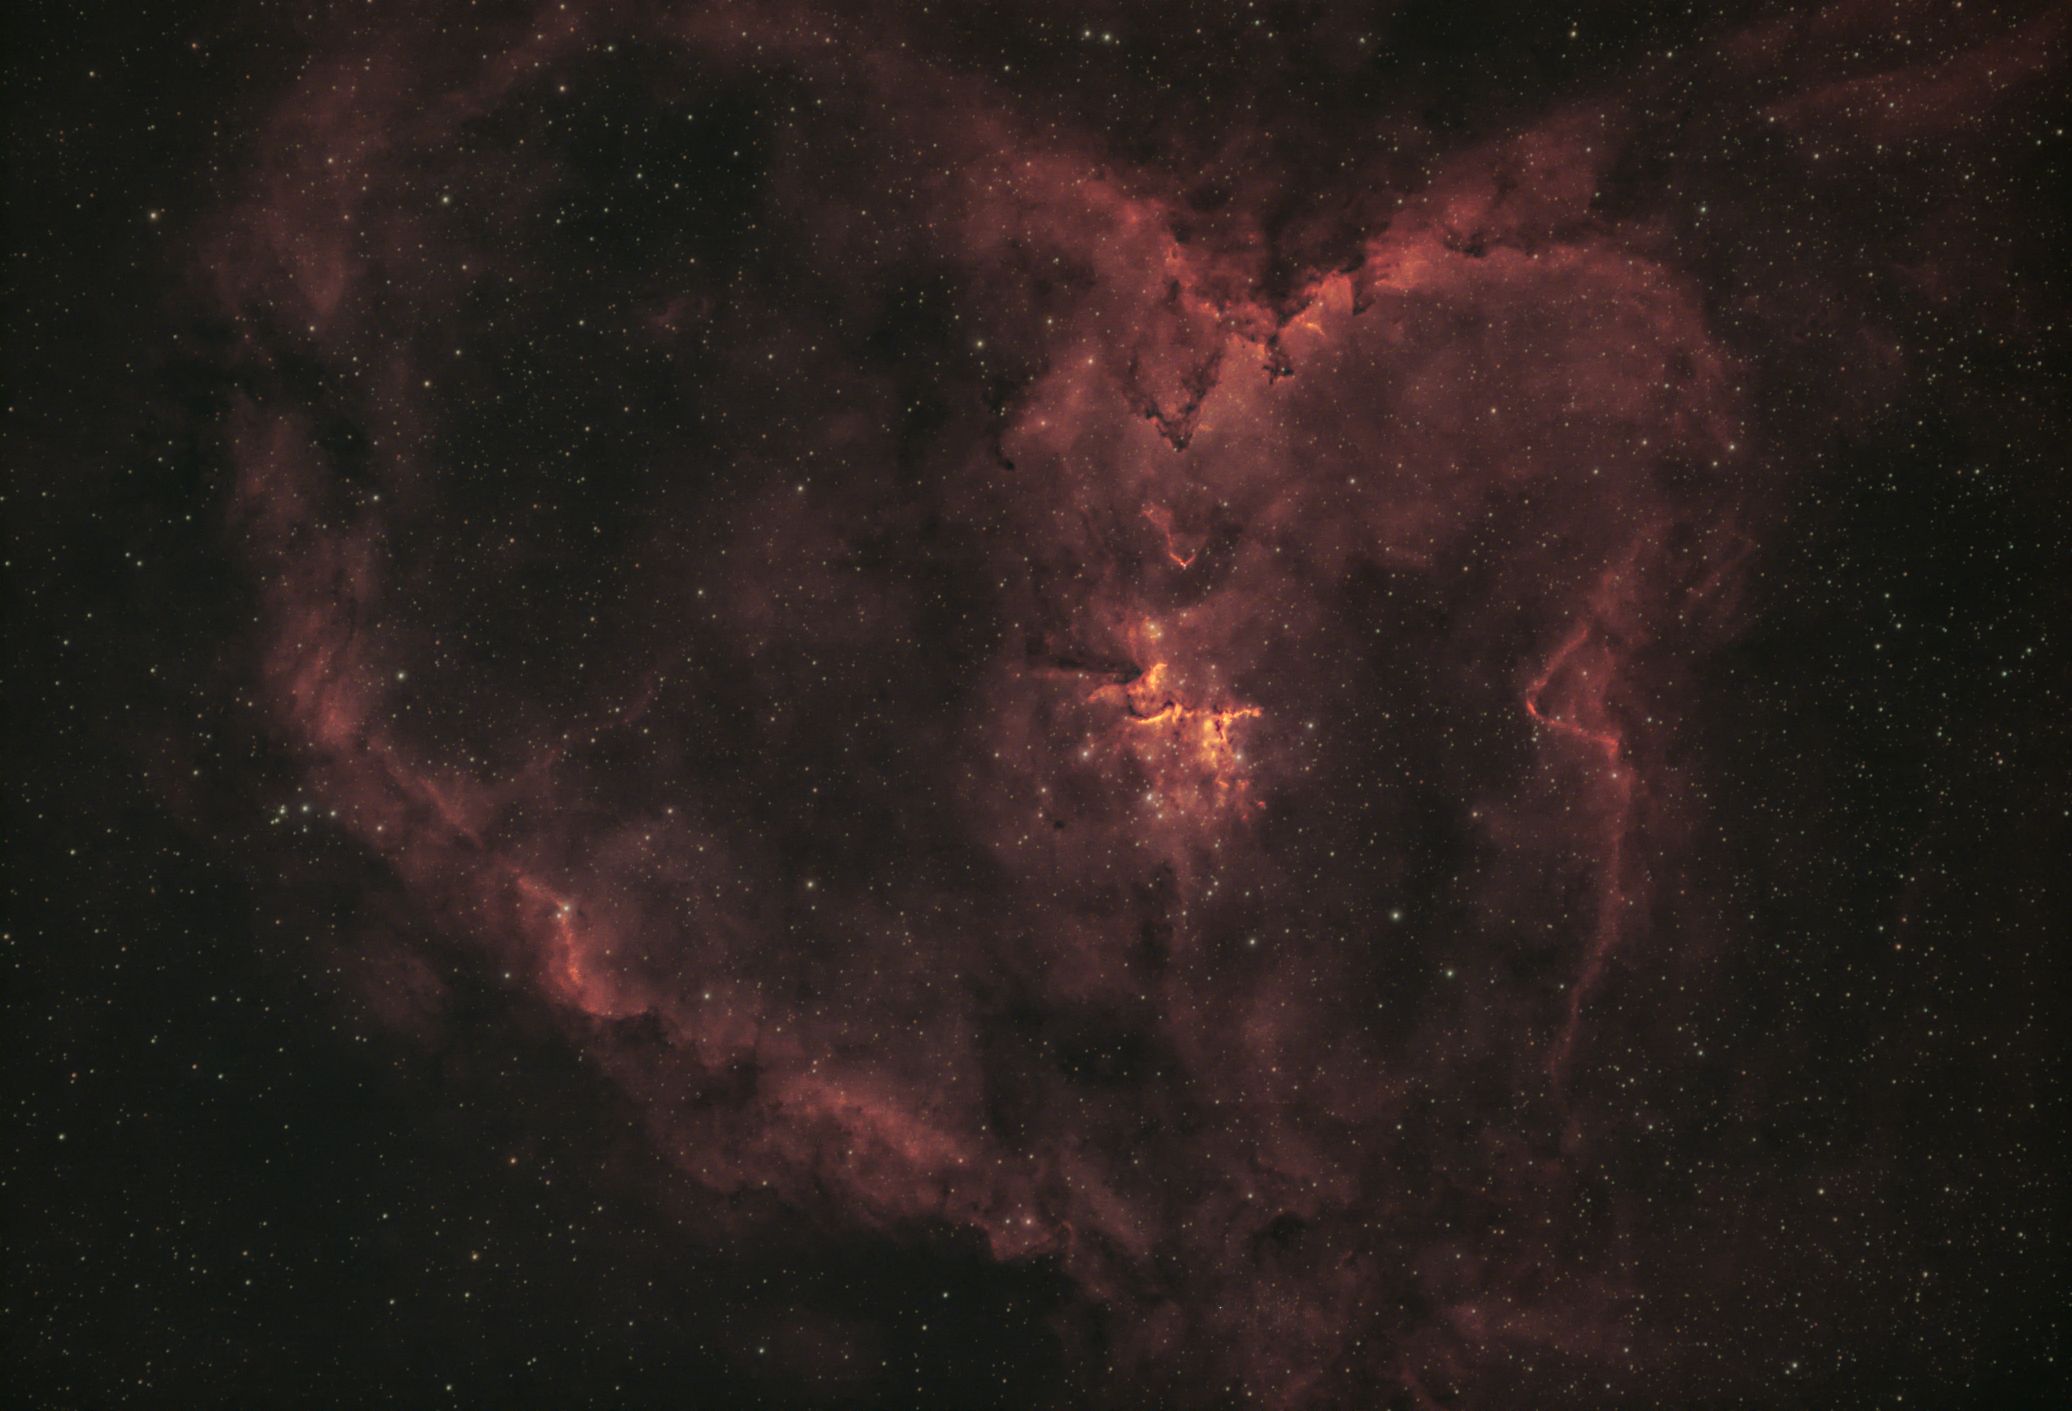 Phil Rourke.  IC 1805 the Heart Nebula in Cassiopeia.  30th. November 2022. SkyWatcher ED80 refractor and focal reducer, SkyWatcher HEQ5PRO mount, ZWO ASI294MC PRO colour camera and Optolong Extreme dual narrowband filter.